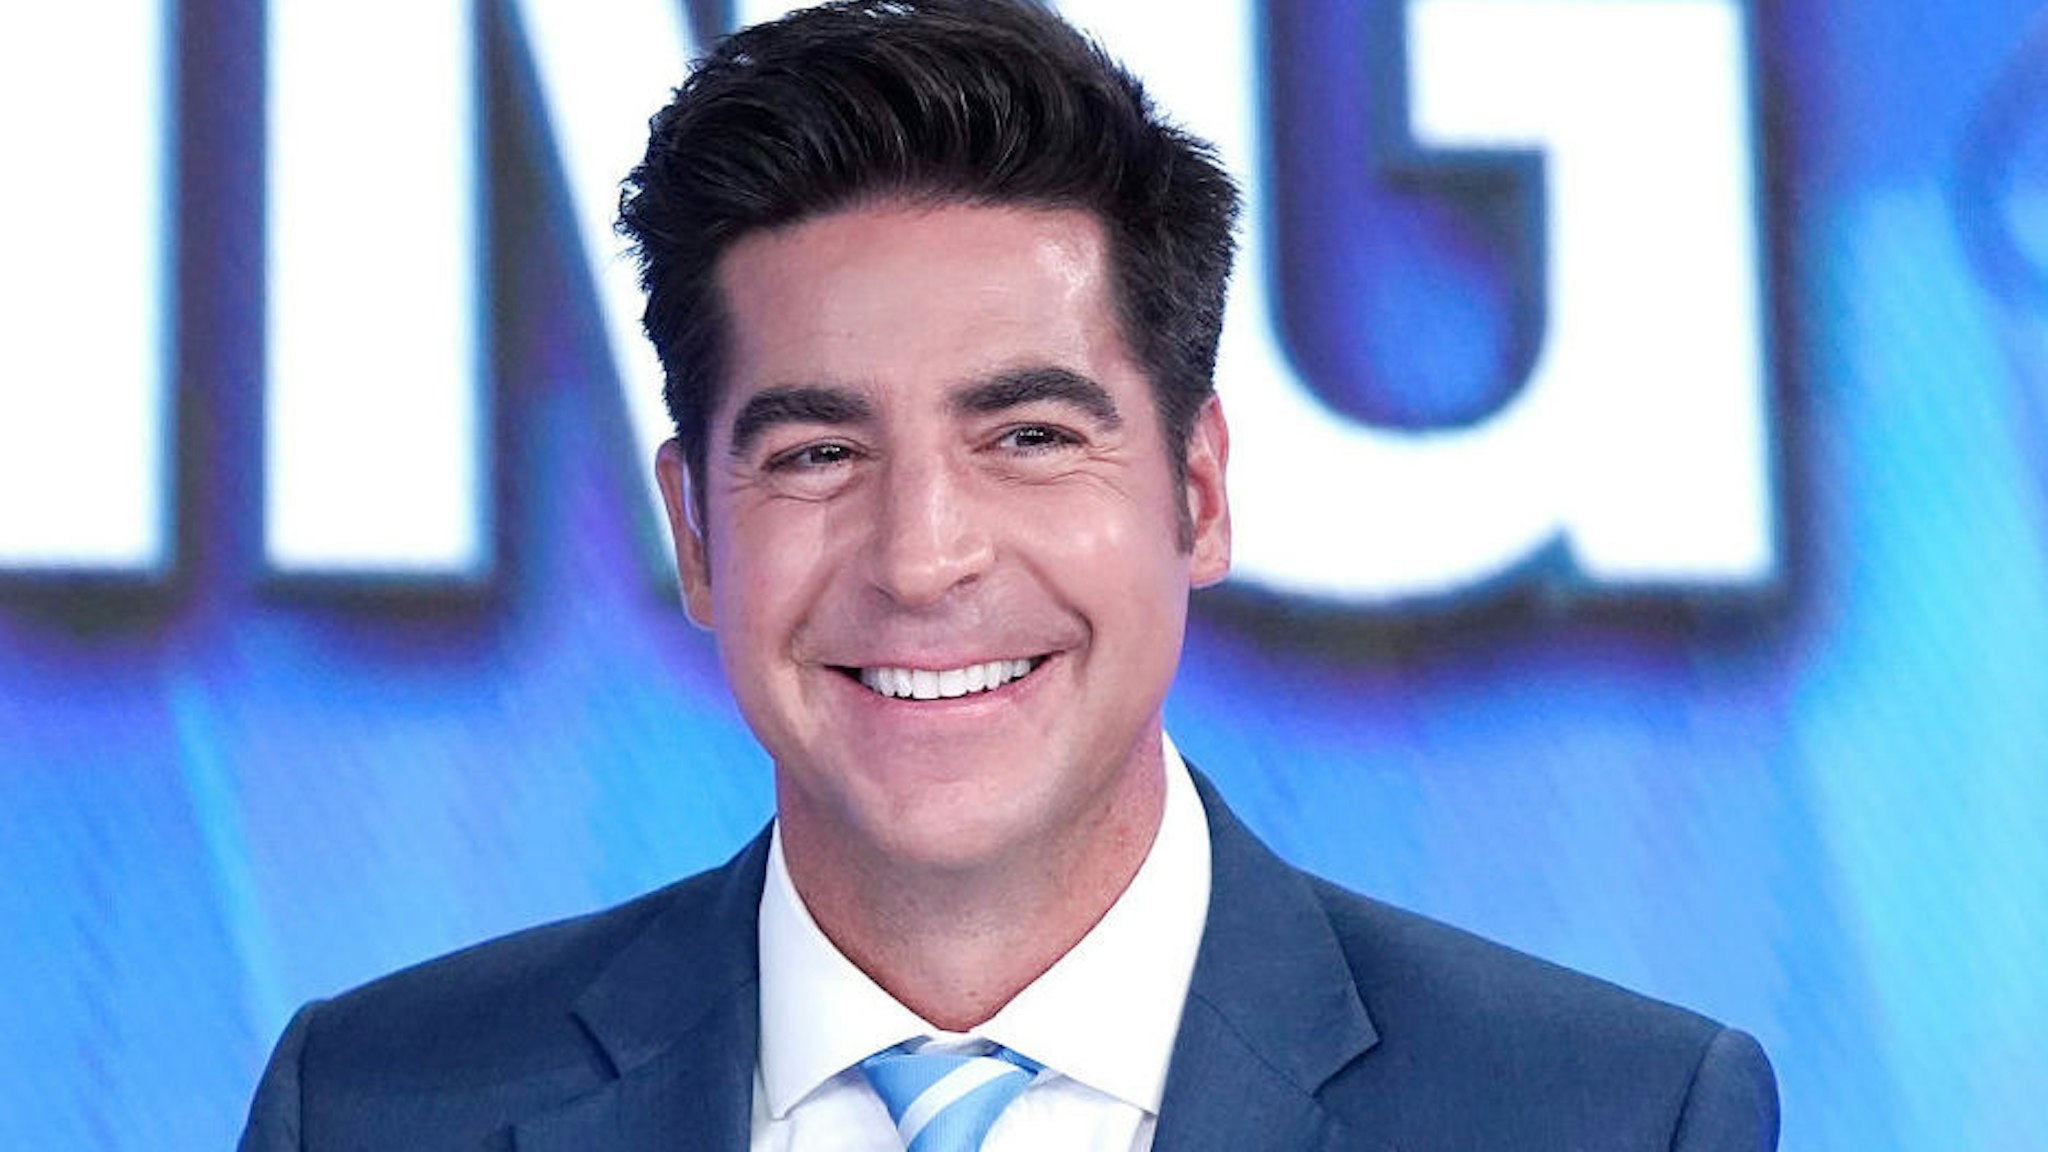 Fox cohost of "The Five" Jesse Watters welcomes Columbus Zoo for Animals Are Great Segment at Fox News Channel Studios on September 12, 2019 in New York City.